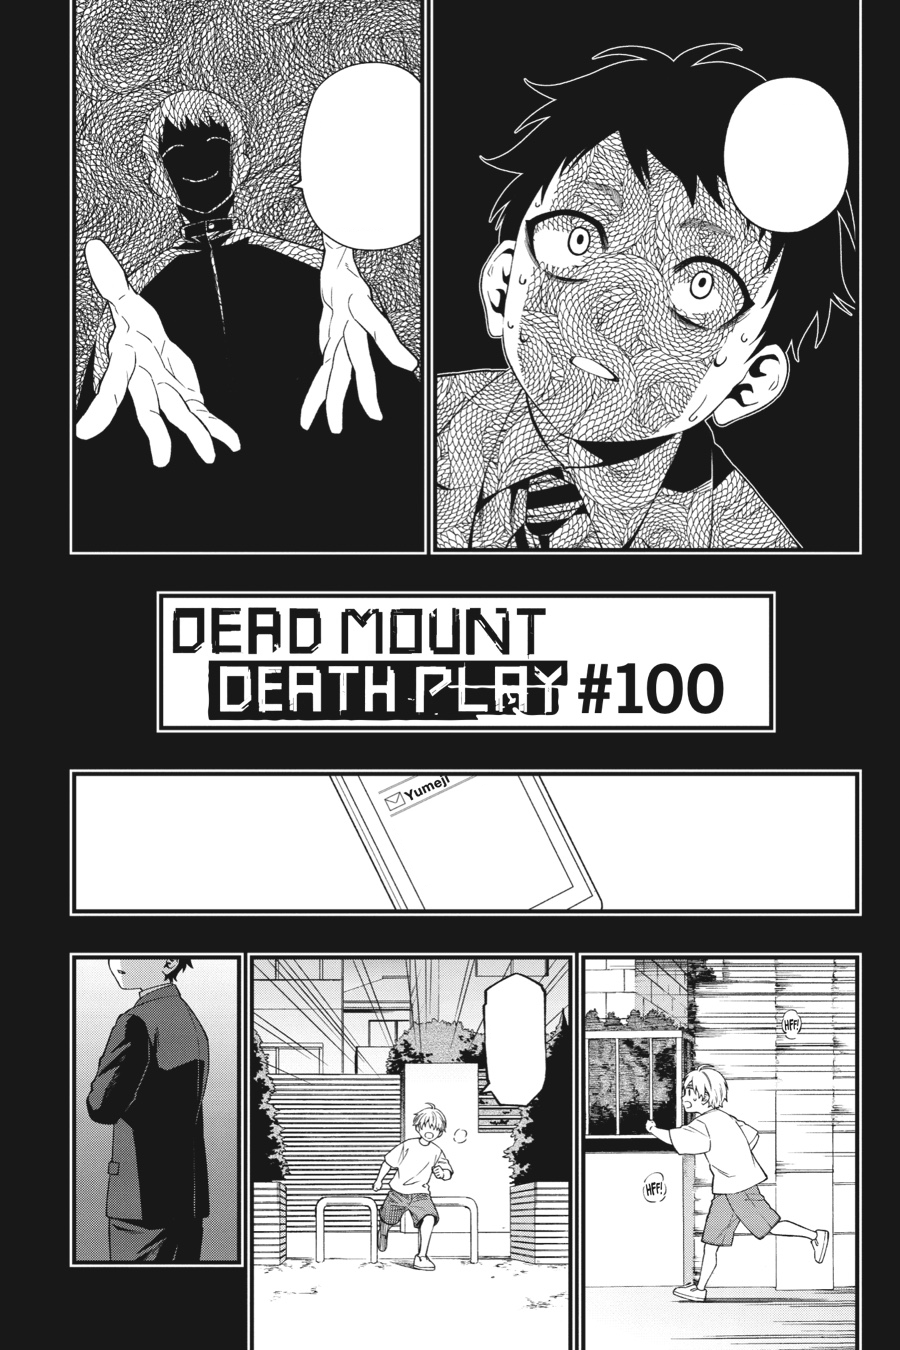 Everything on Dead Mount Death Play Manga: Where To Watch?